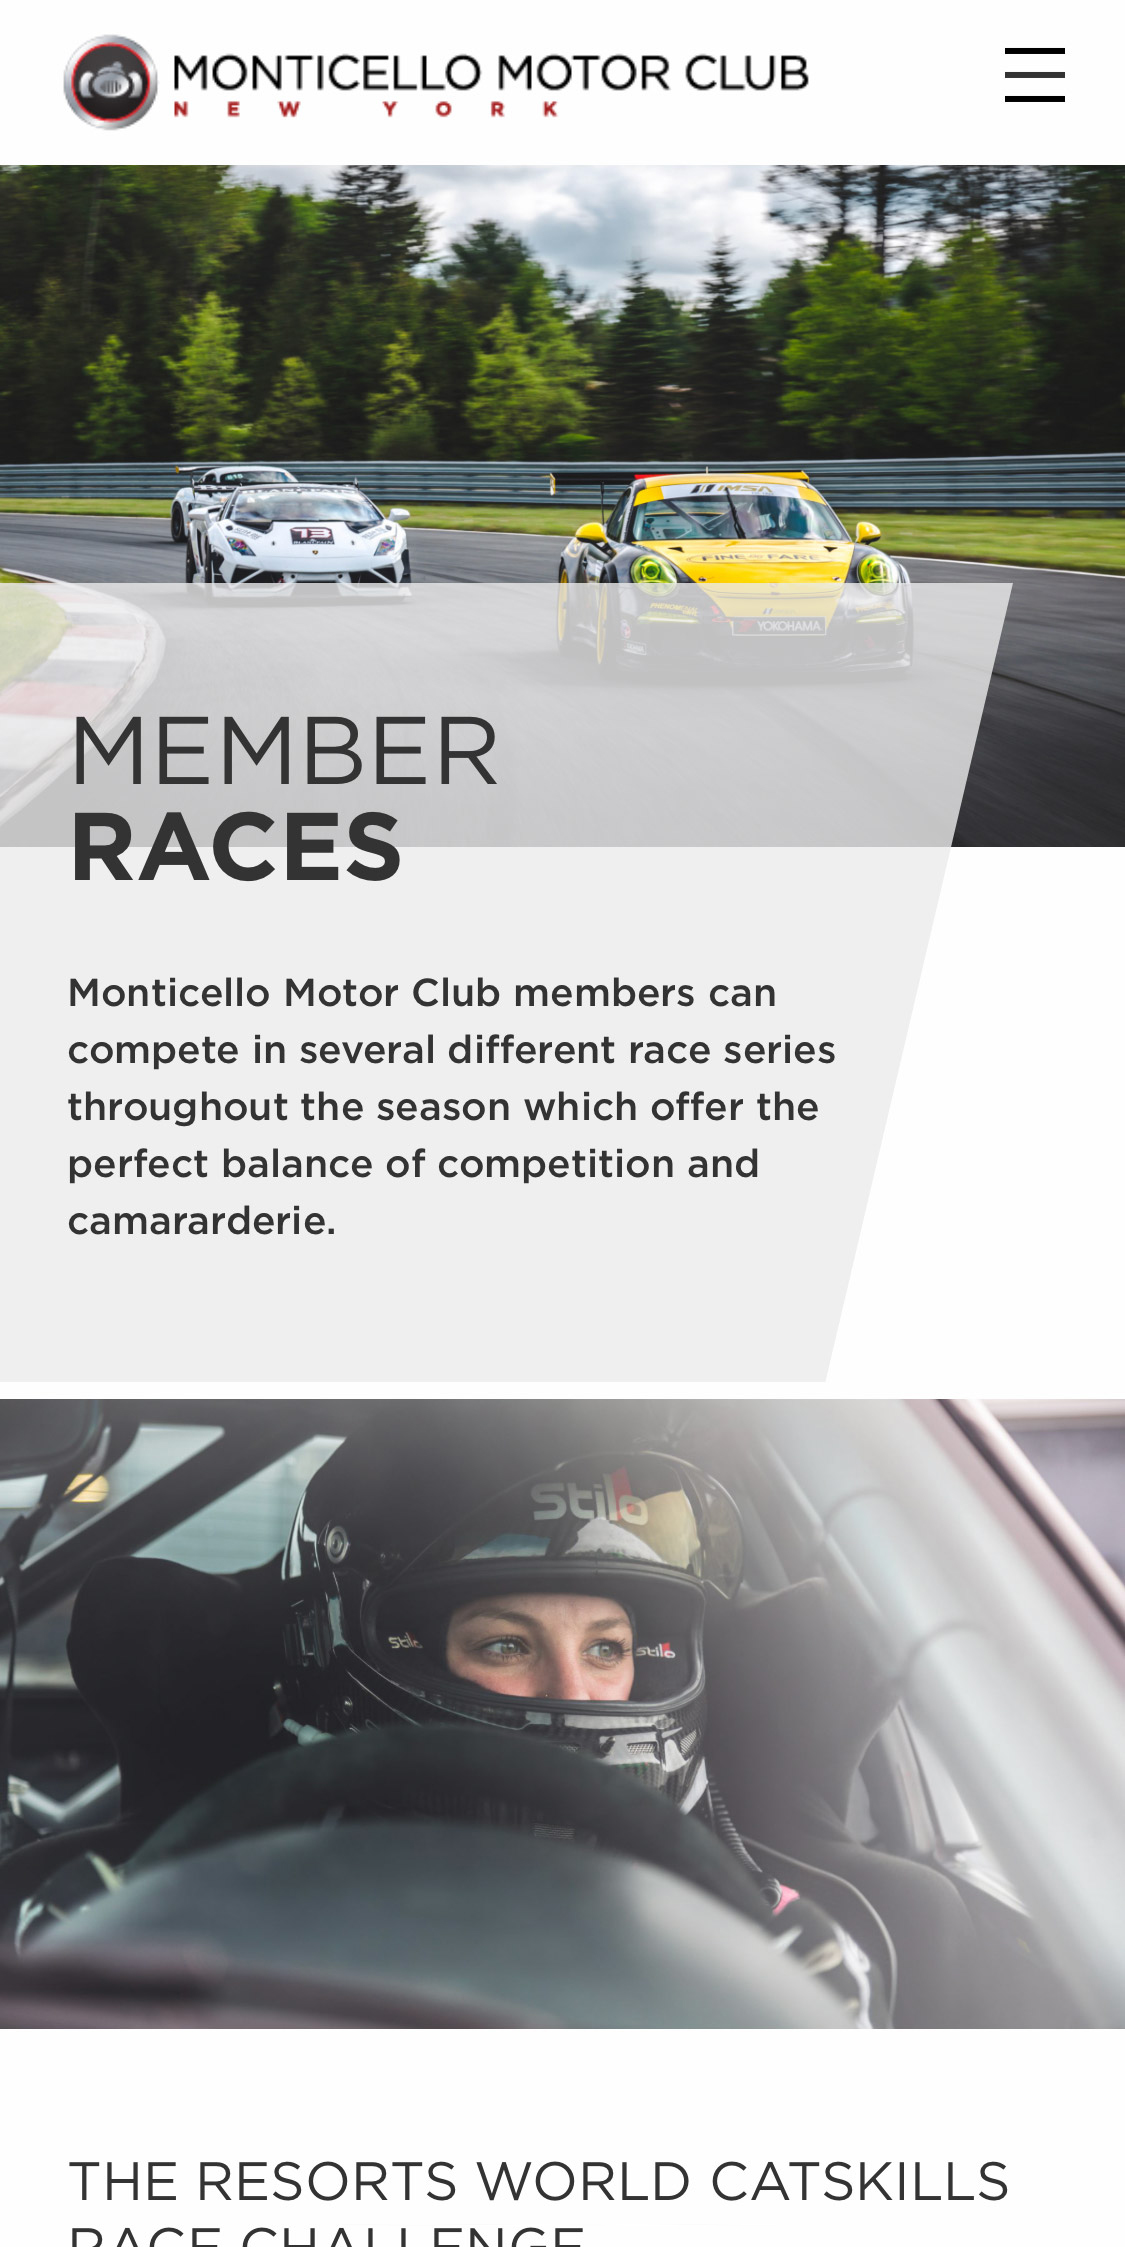 A screenshot of the MMC website mobile Member Races page, top section